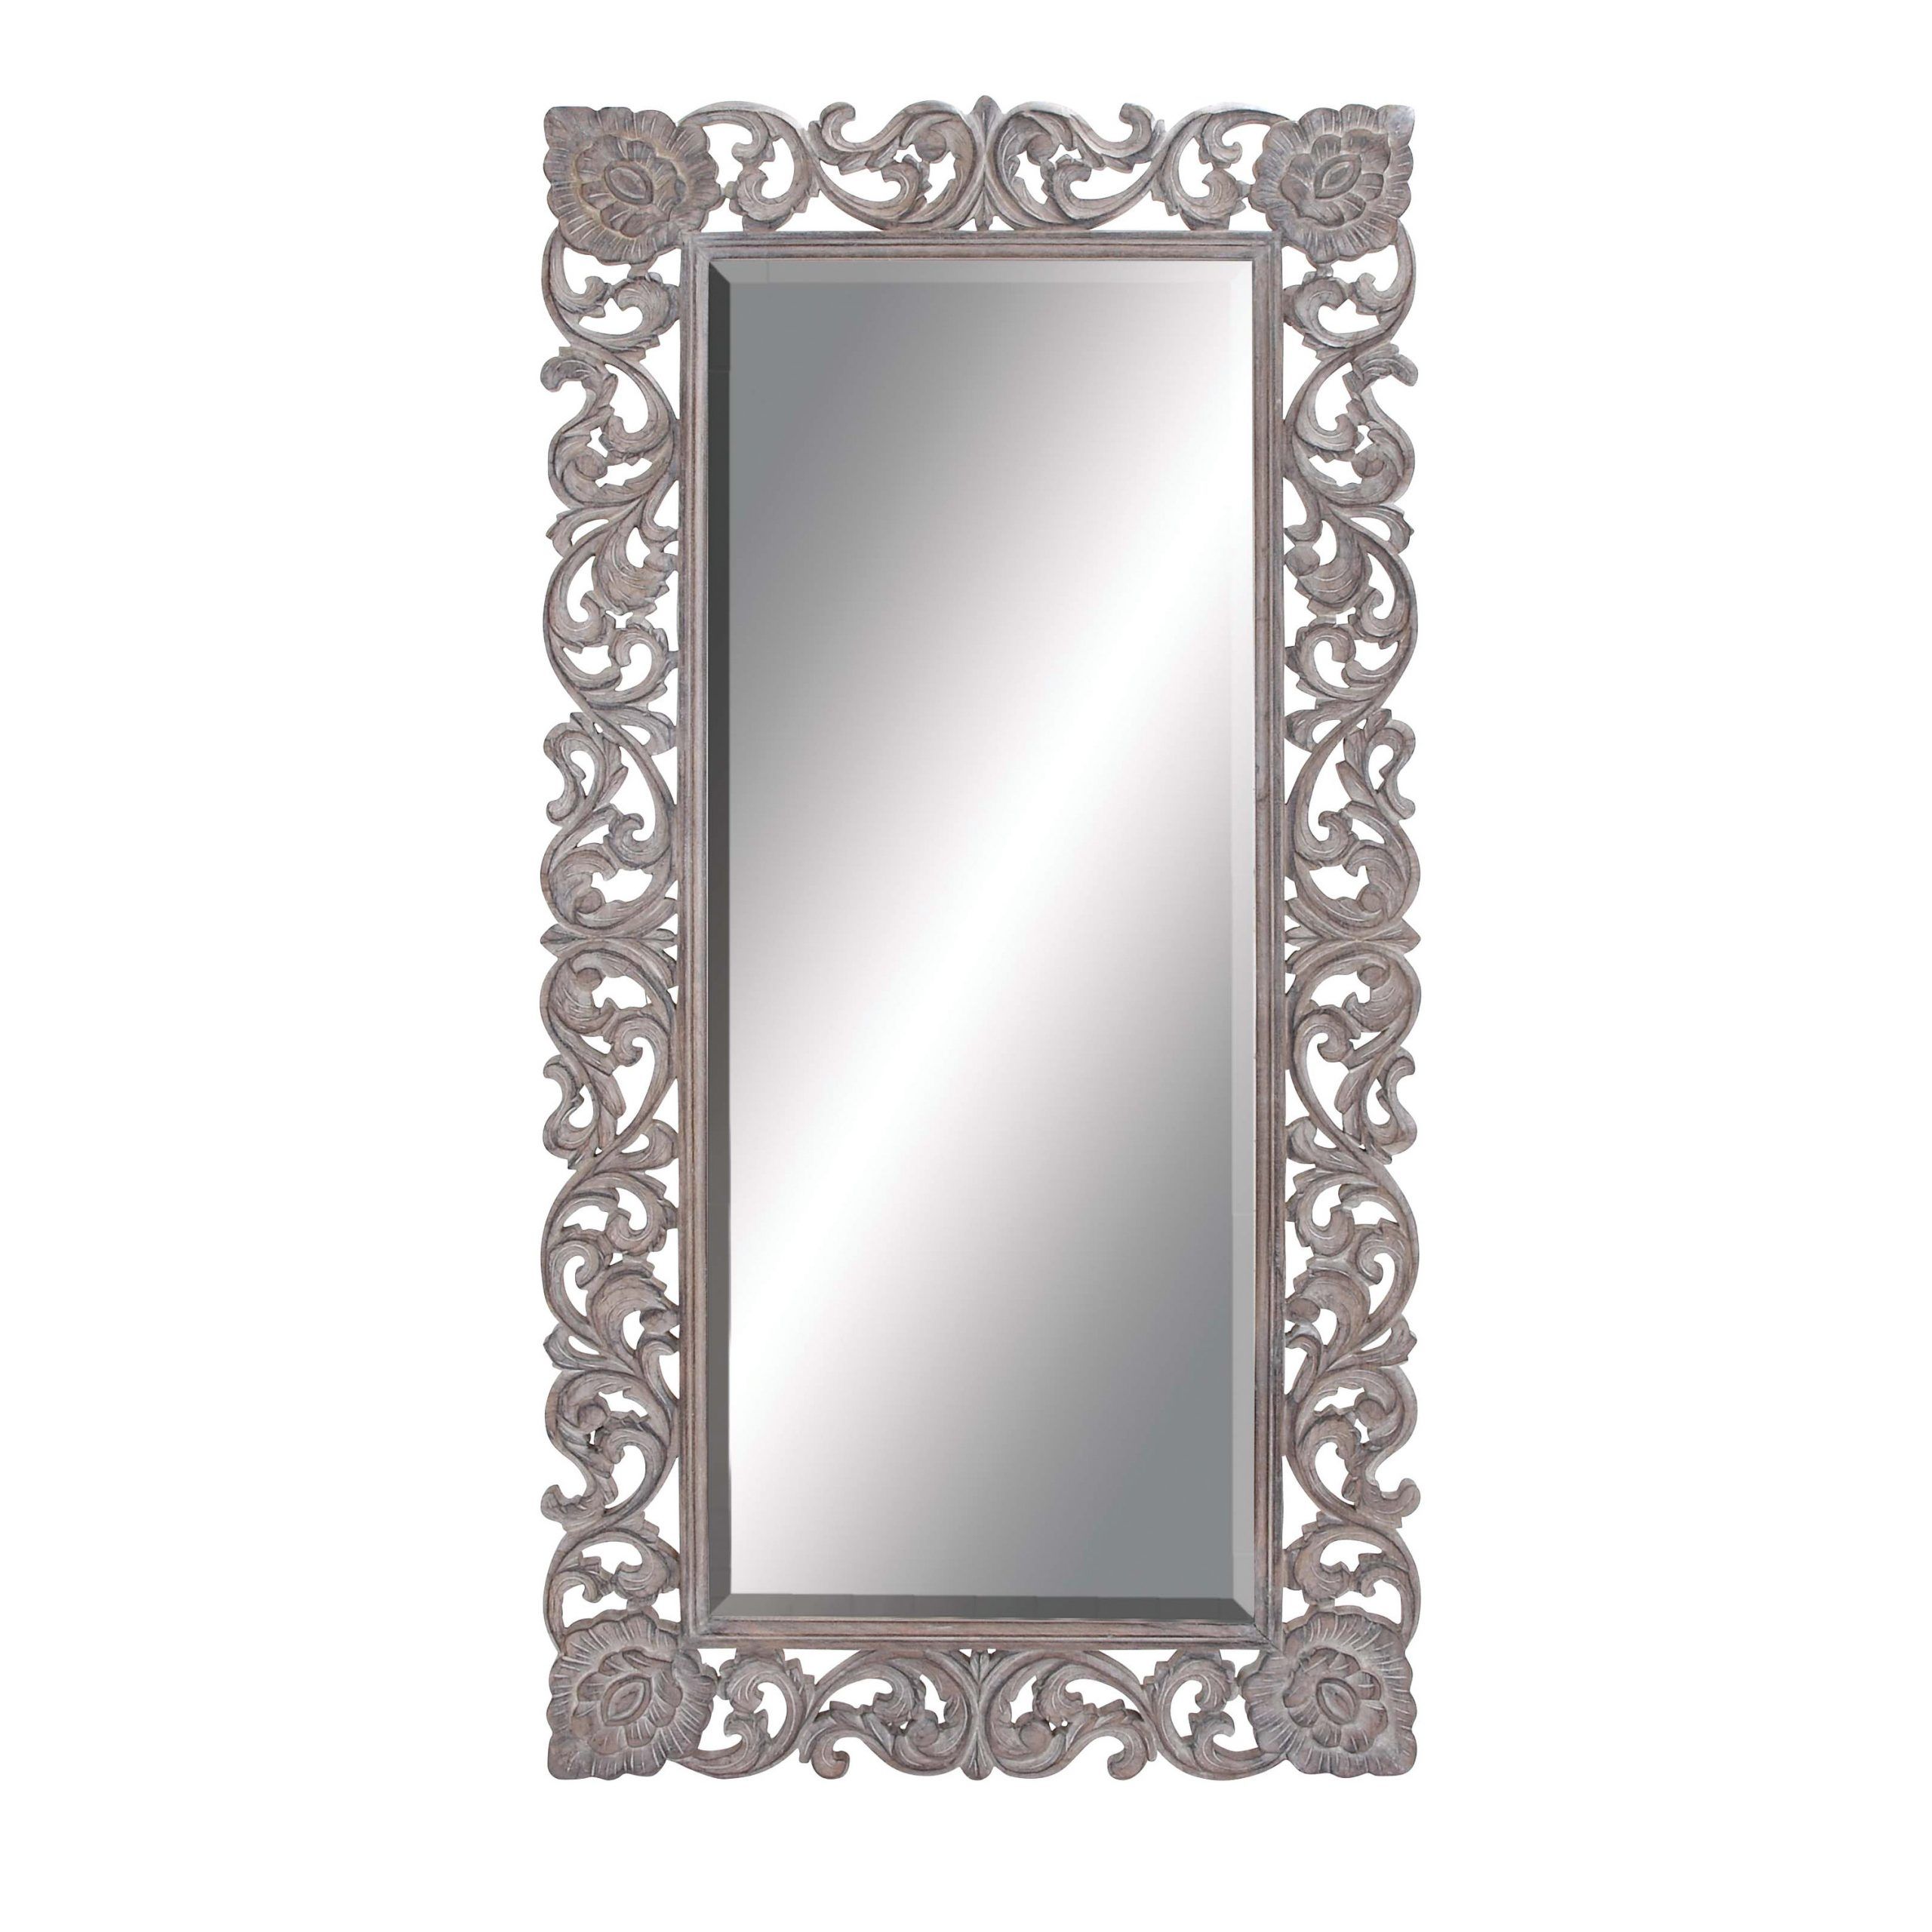 Decmode Full Length Rectangular Distressed Grey Wood Carved Frame Wall Pertaining To Mahogany Full Length Mirrors (View 7 of 15)